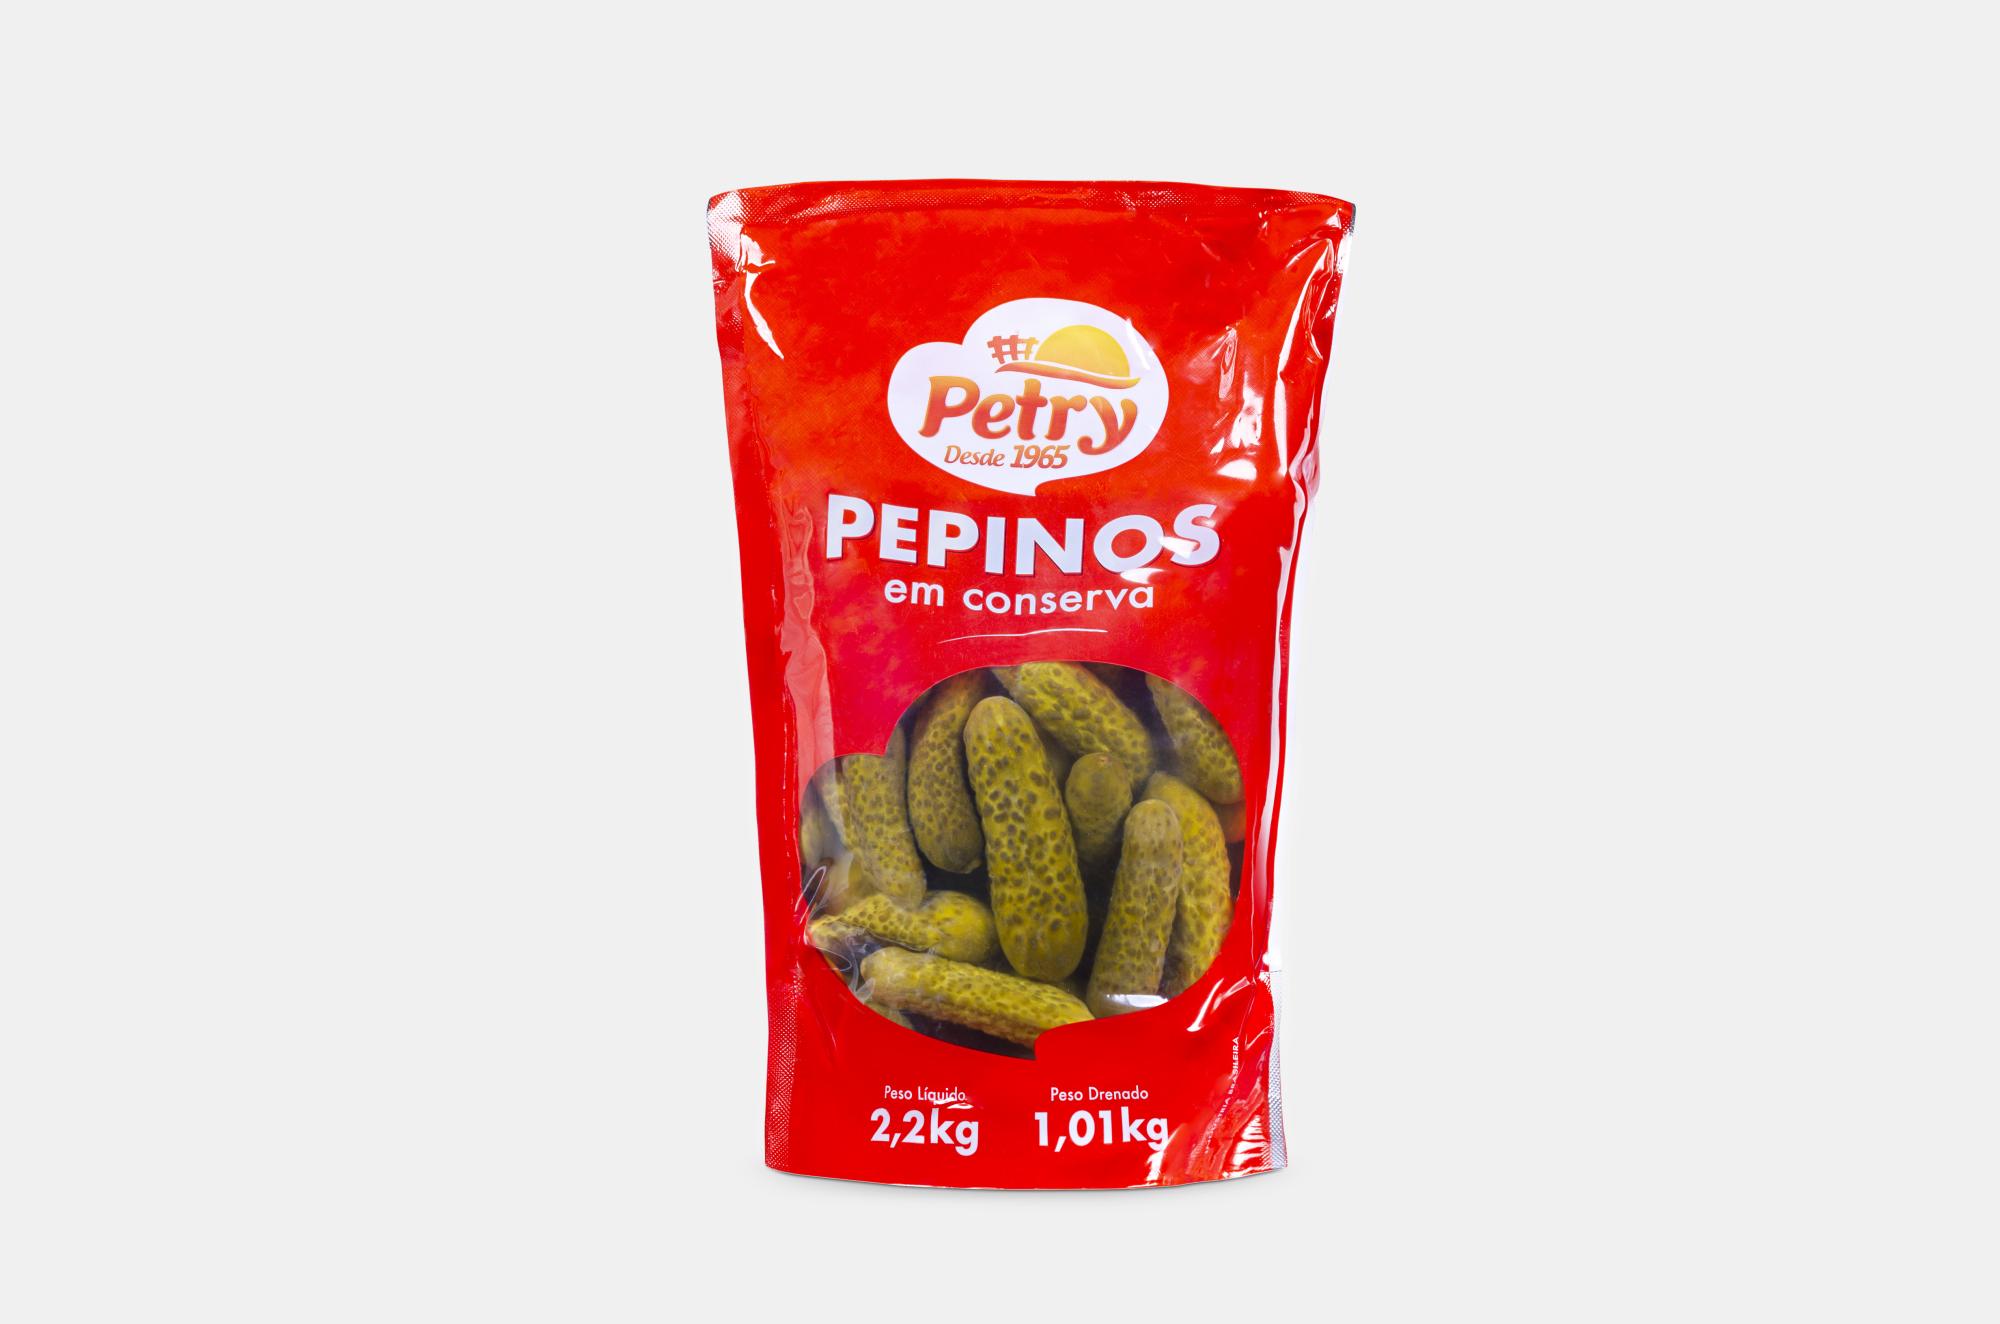 Pepino pouch 1,01kg Petry